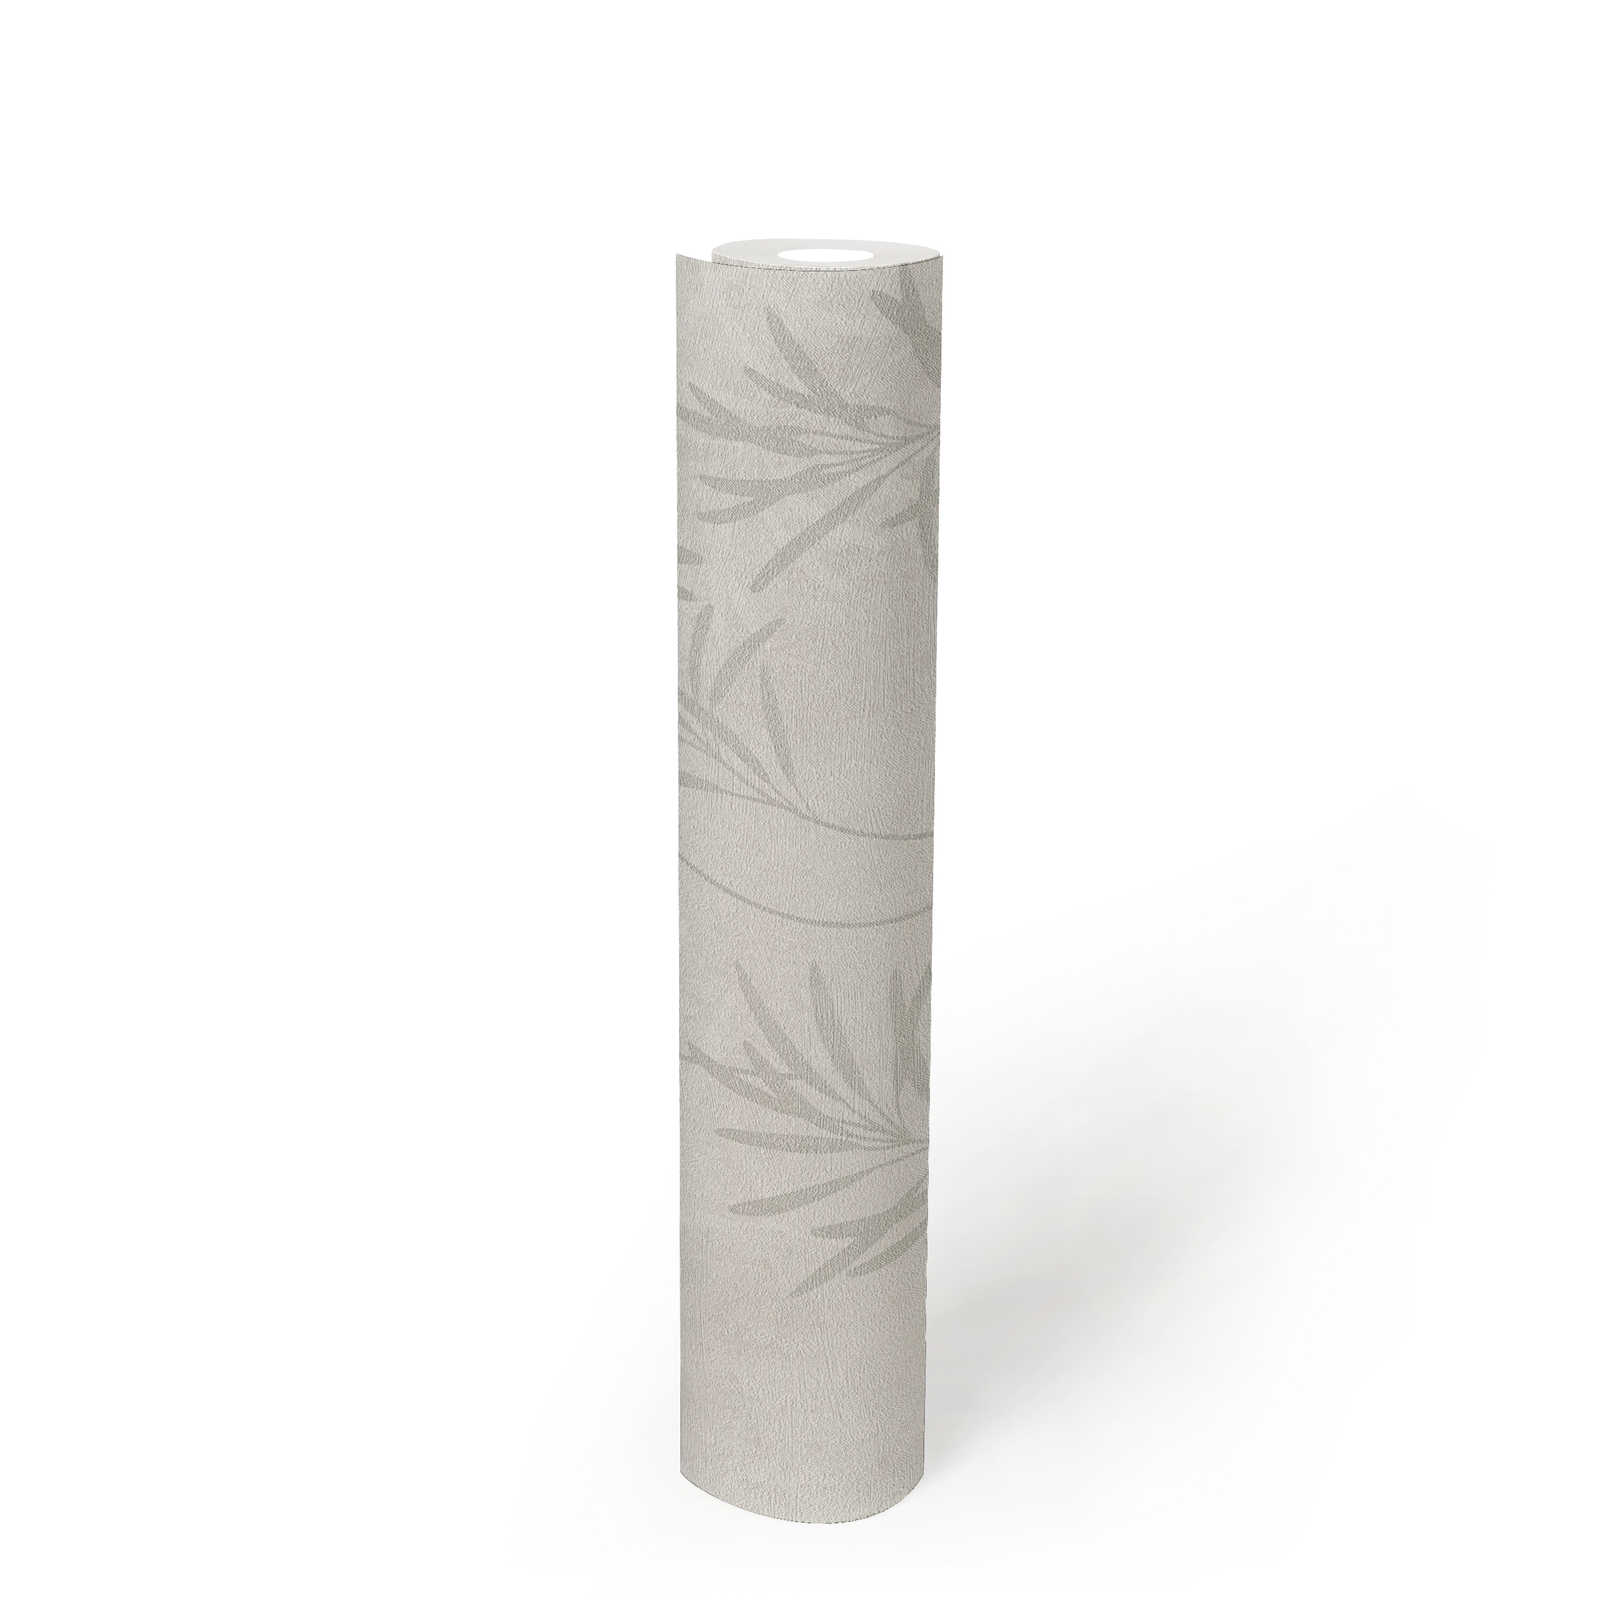             Floral non-woven wallpaper with grass pattern and fine structure - white, grey, metallic
        